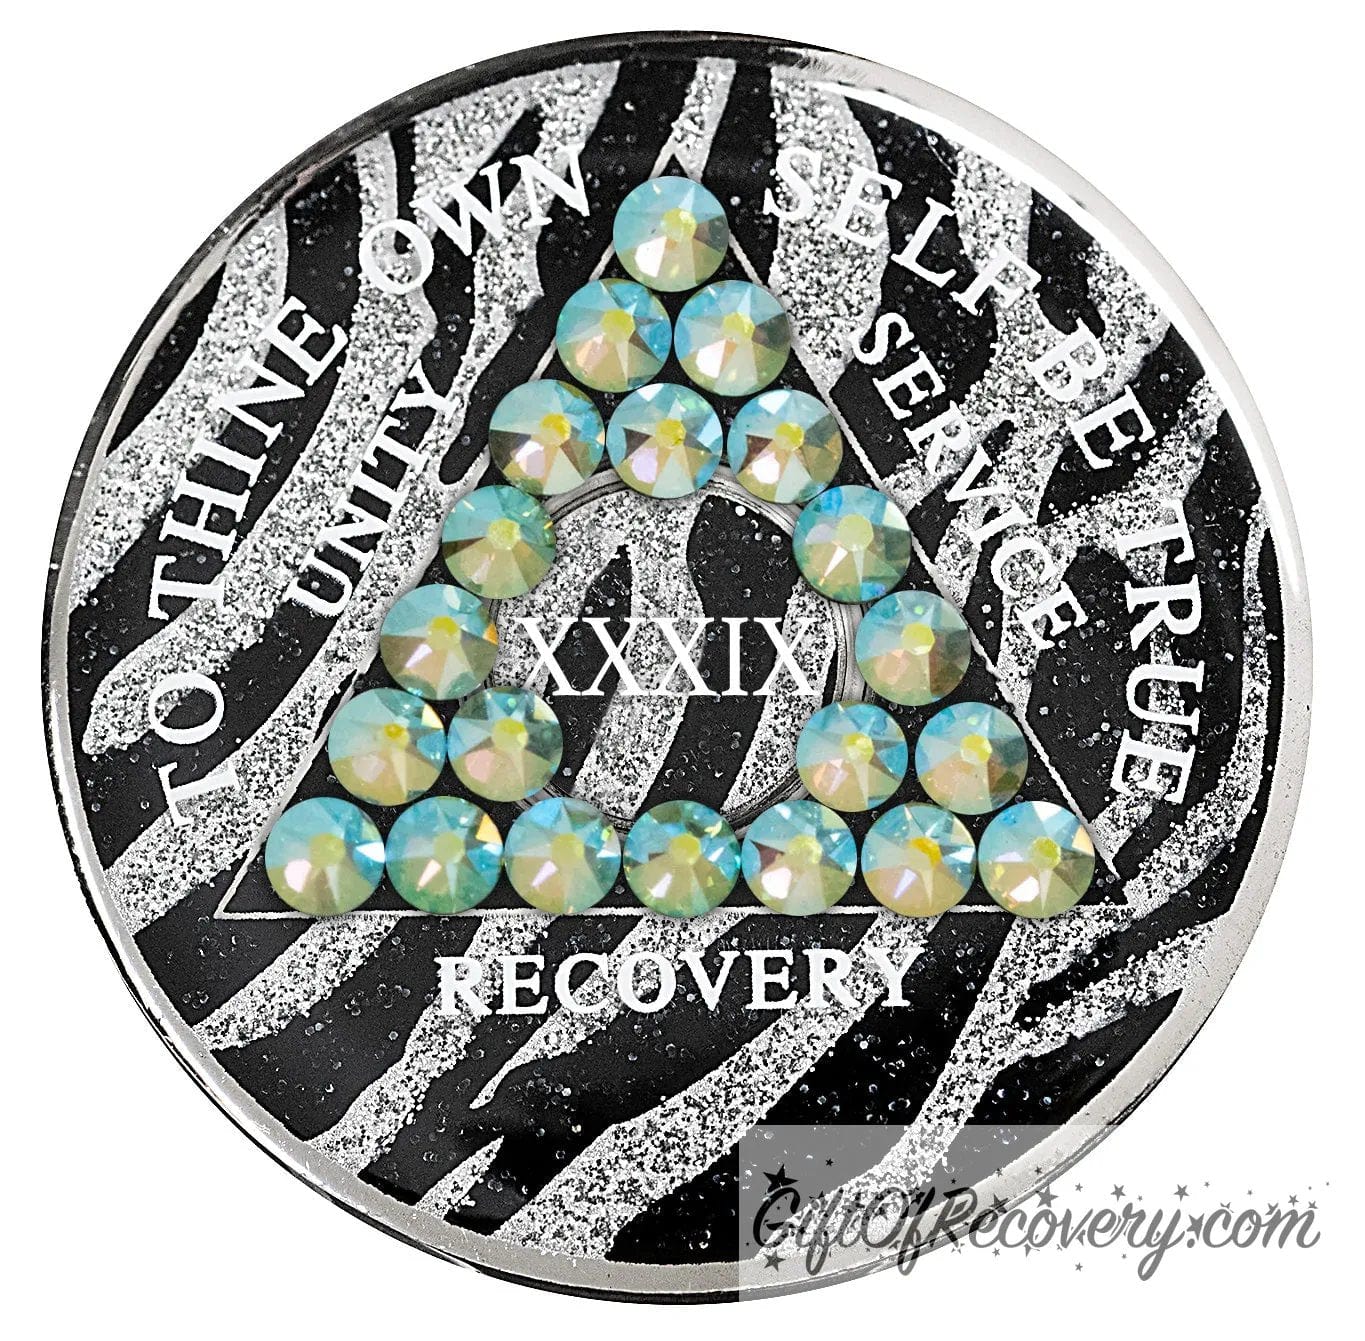 39 year Zebra glitter style AA medallion with 21 genuine peridot crystals, AA moto, unity, service, recovery, and roman numeral are in white and blend into the pattern, so you can let your recovery shine, not your time, the outer rim is silver plated, sealed in a high-quality, chip and scratch-resistant resin dome giving it a beautiful glossy look that will last.